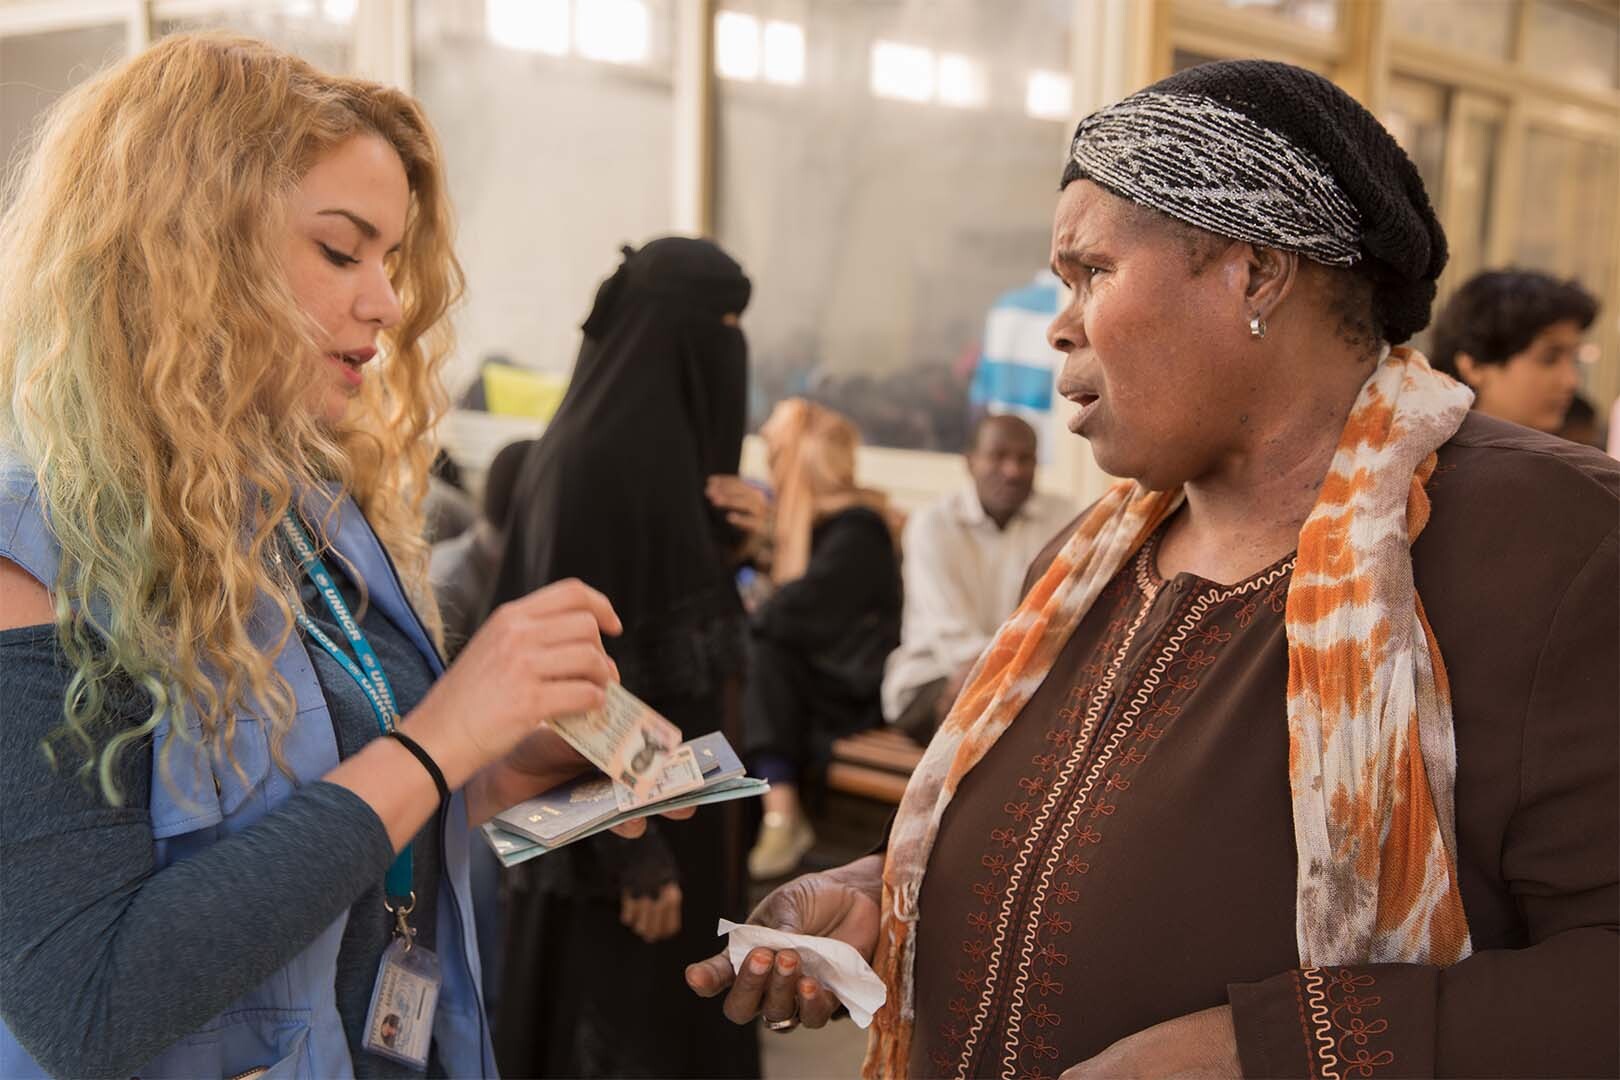 National UN Volunteer Registration Assistant Nour Abdelhak, with UNHCR, counselling refugees and asylum-seekers at UNHCR reception centre in Cairo, Egypt.